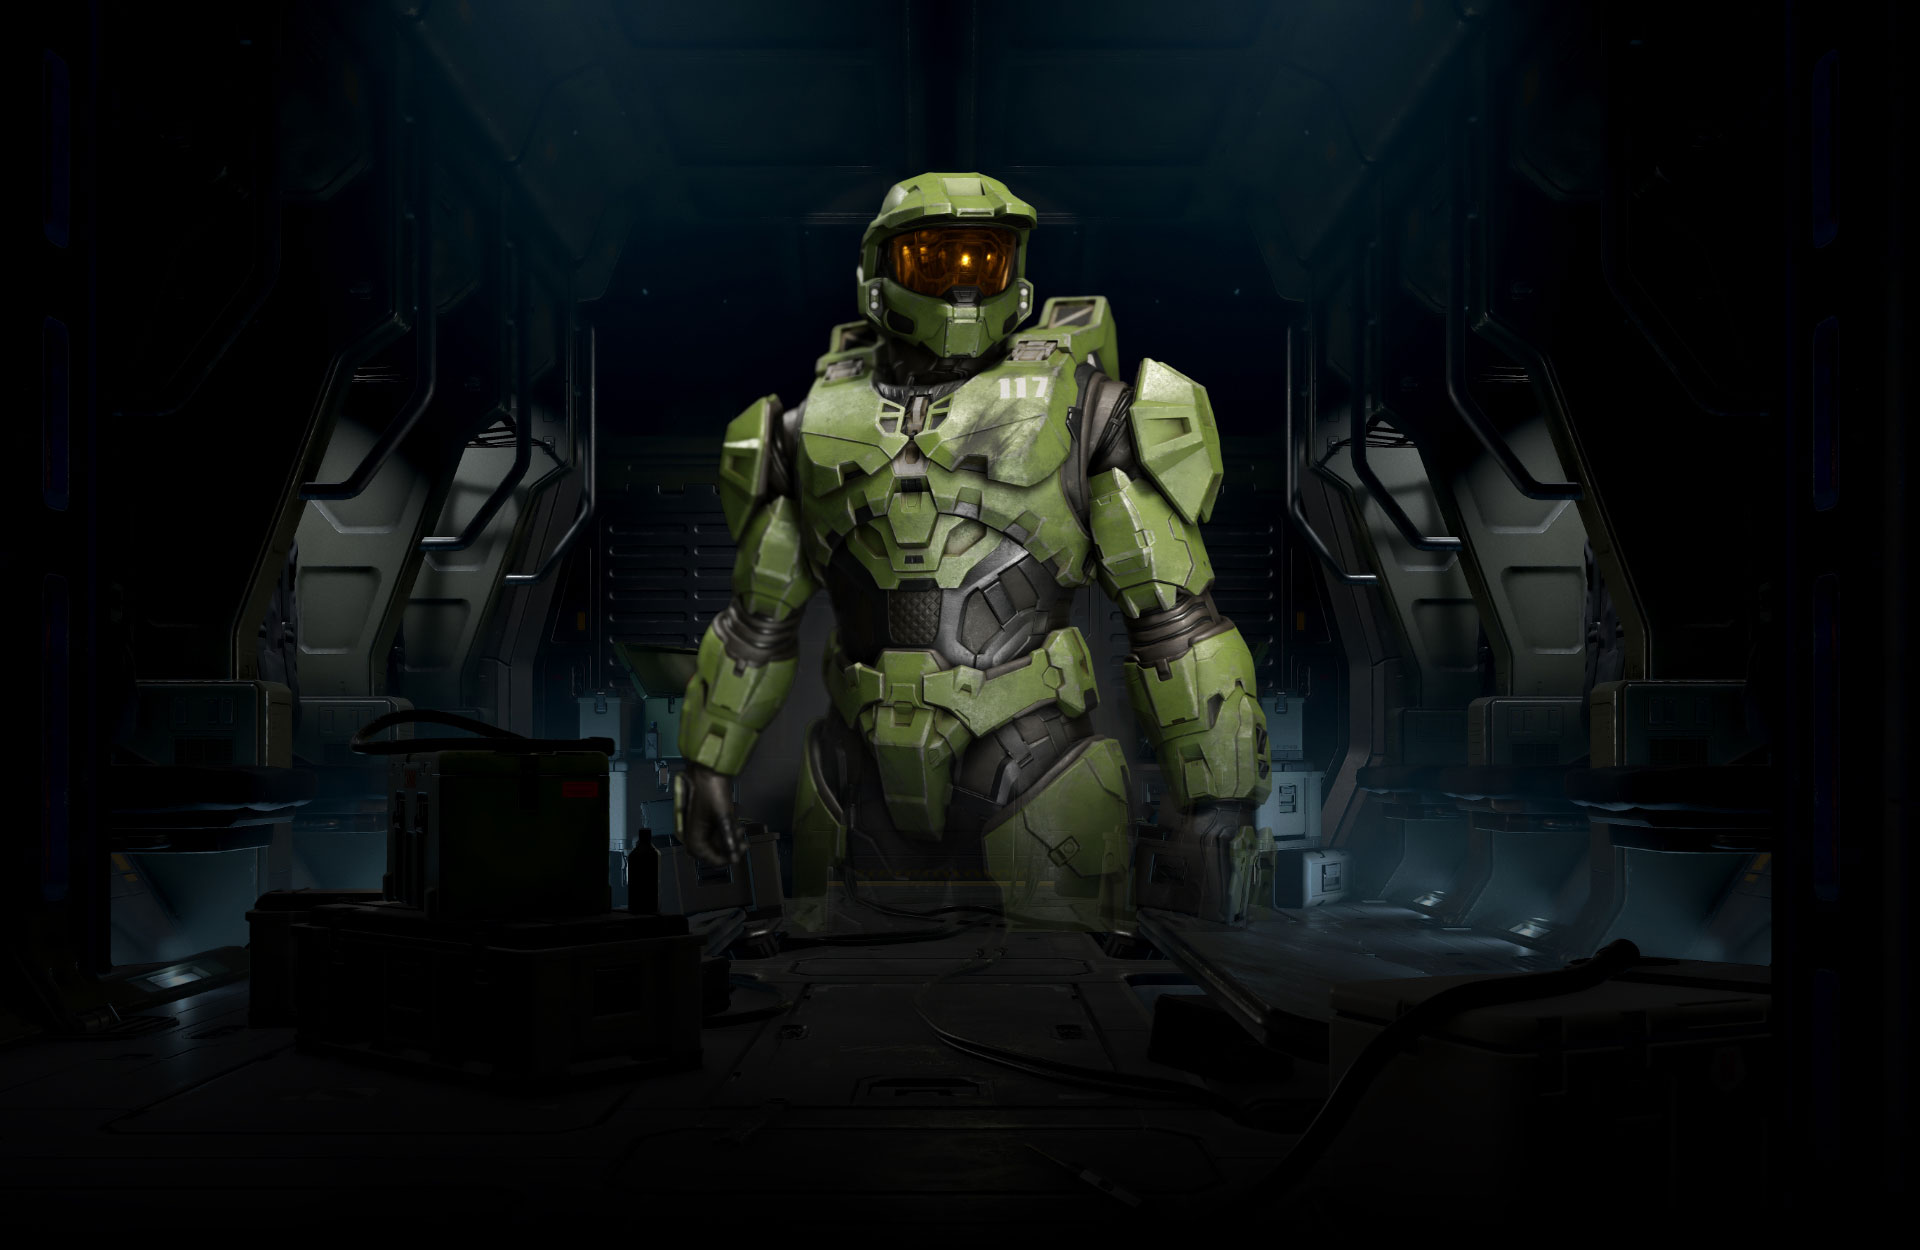 Halo Infinite. Master Chief stands in a dimly lit room, the front of his armor slightly damaged under the “117” on his chest.